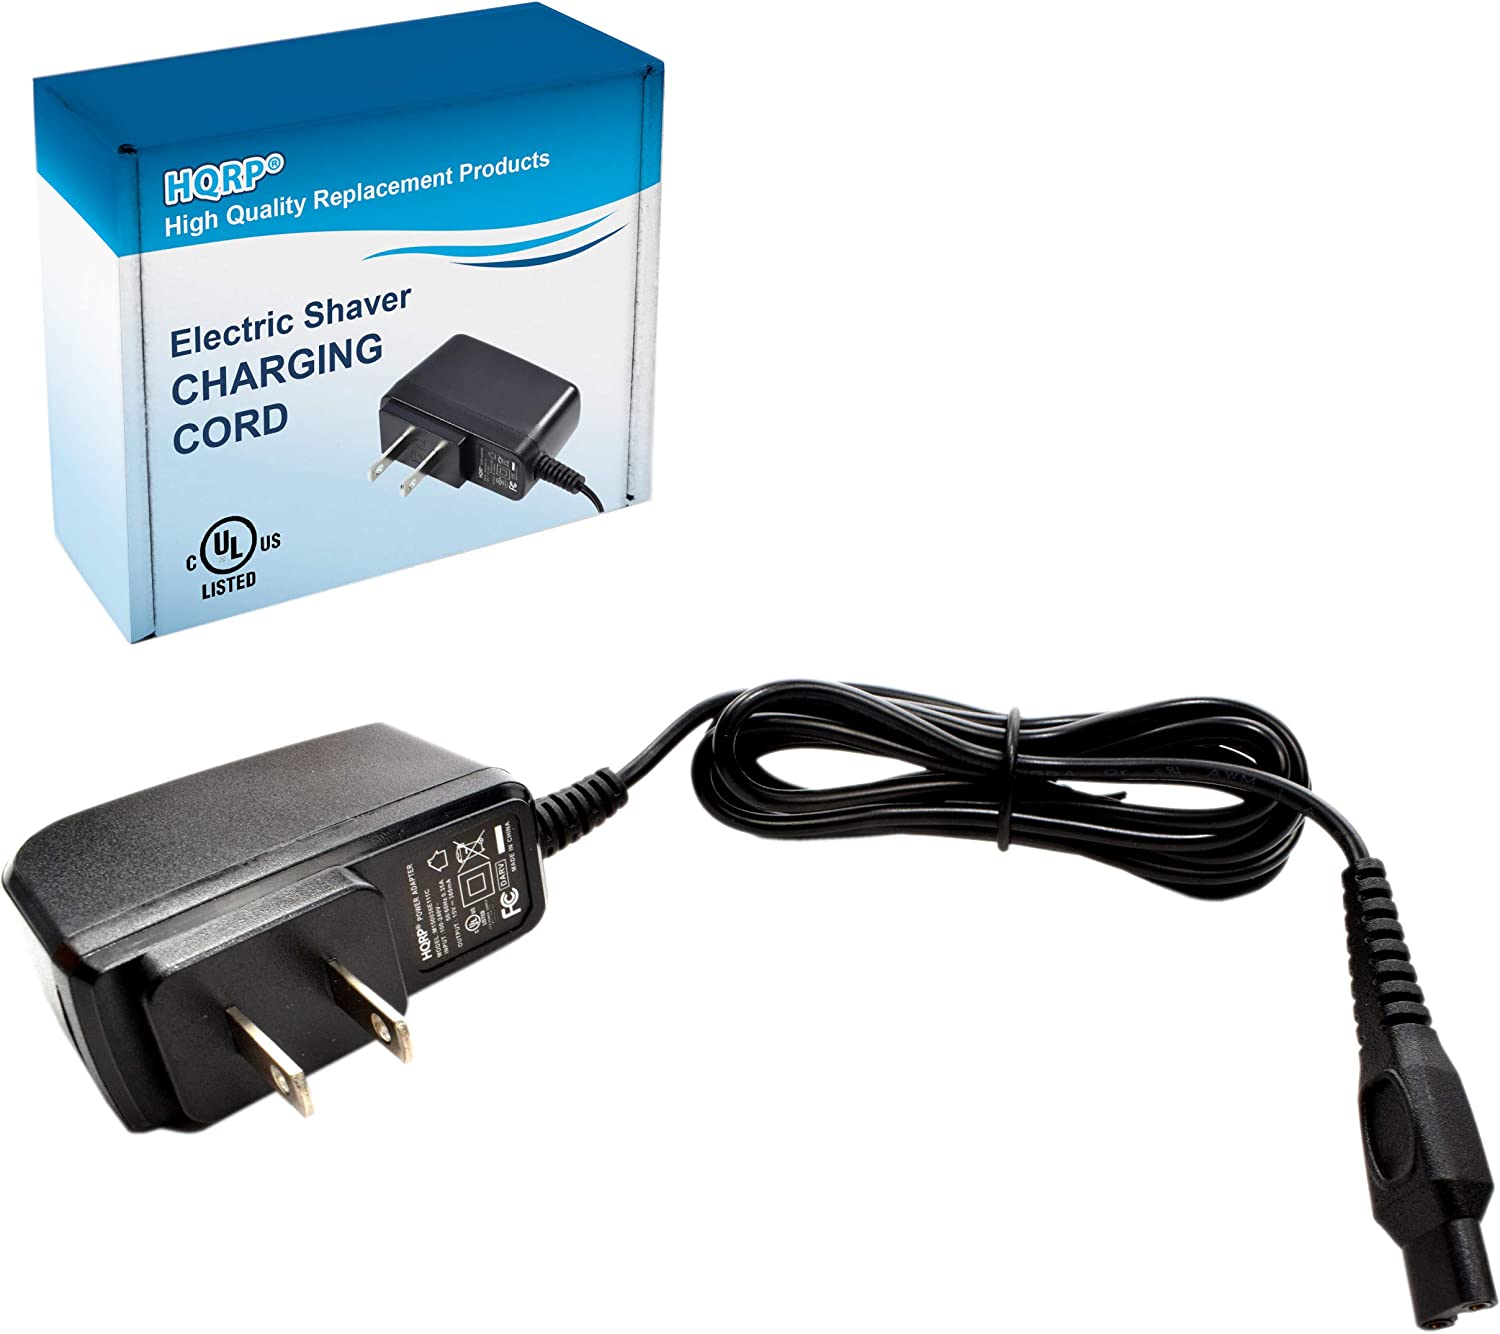 HQRP AC Adapter / Power Cord compatible with Philips Norelco 7315XL, 7325XL, 7340XL, 7345XL, 7349XL, 7350XL Razor / Shaver